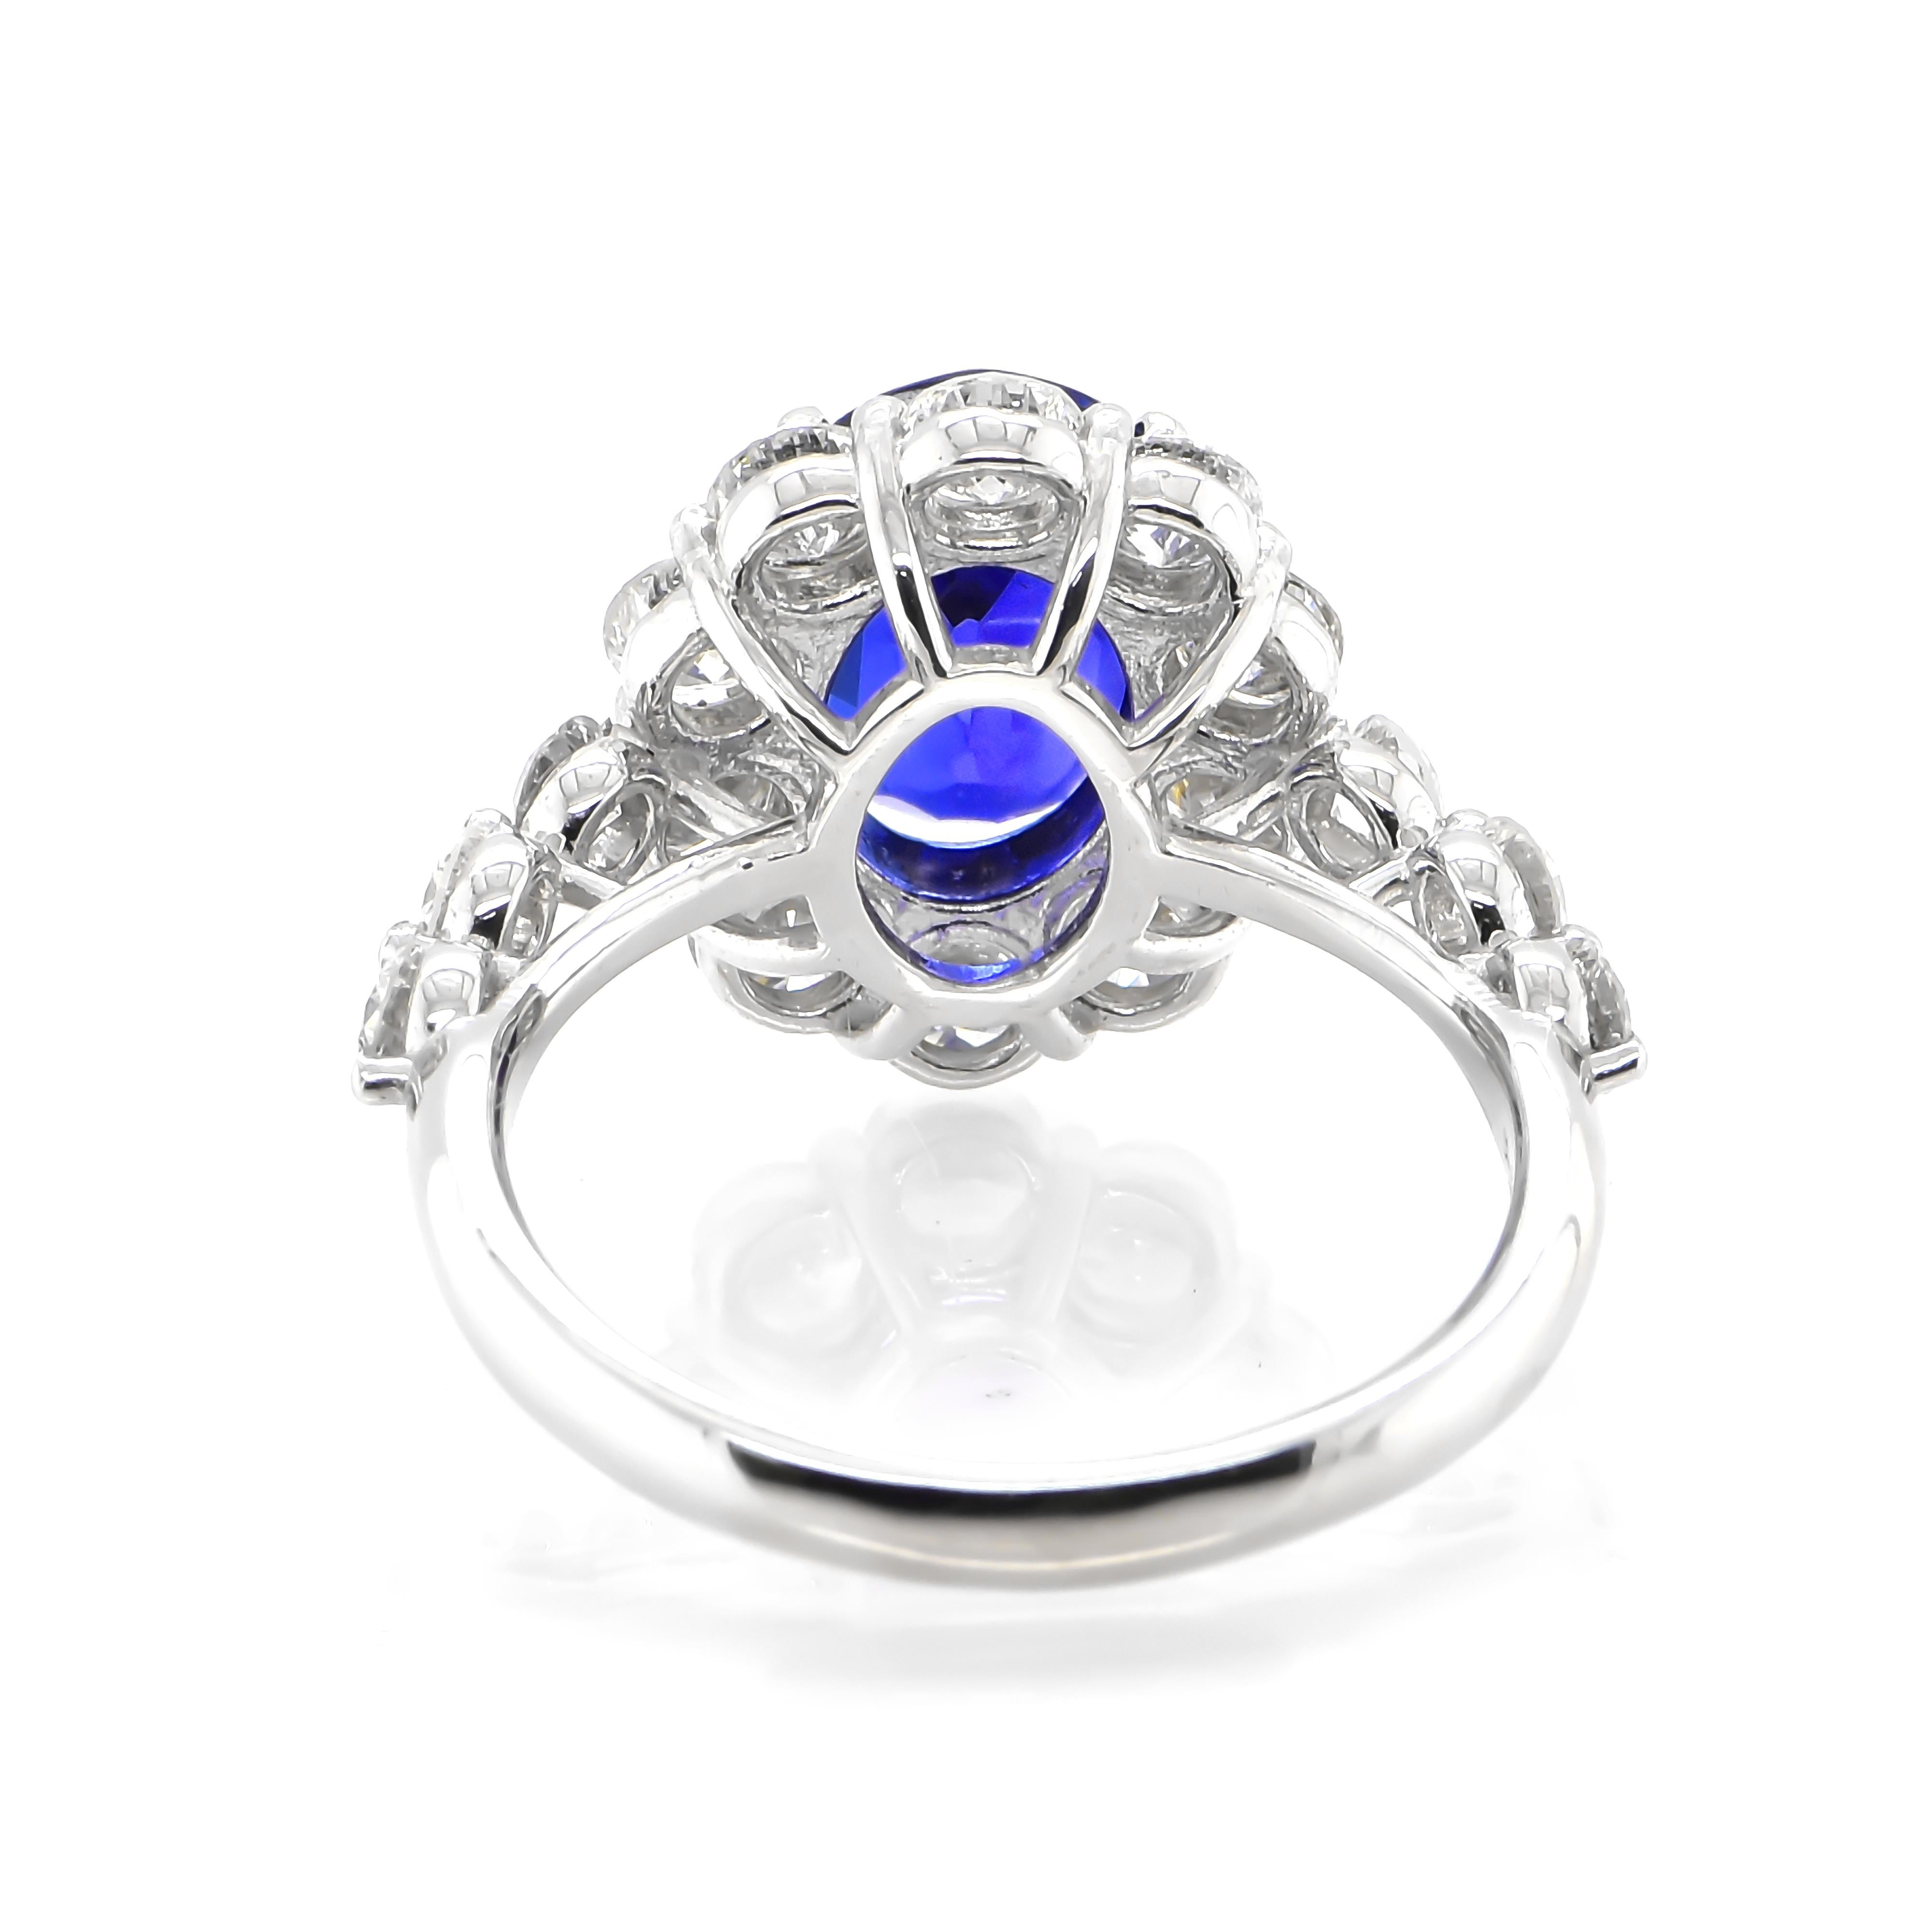 Women's 2.95 Carat Natural Royal Blue Sapphire and Diamond Halo Ring Made in Platinum For Sale